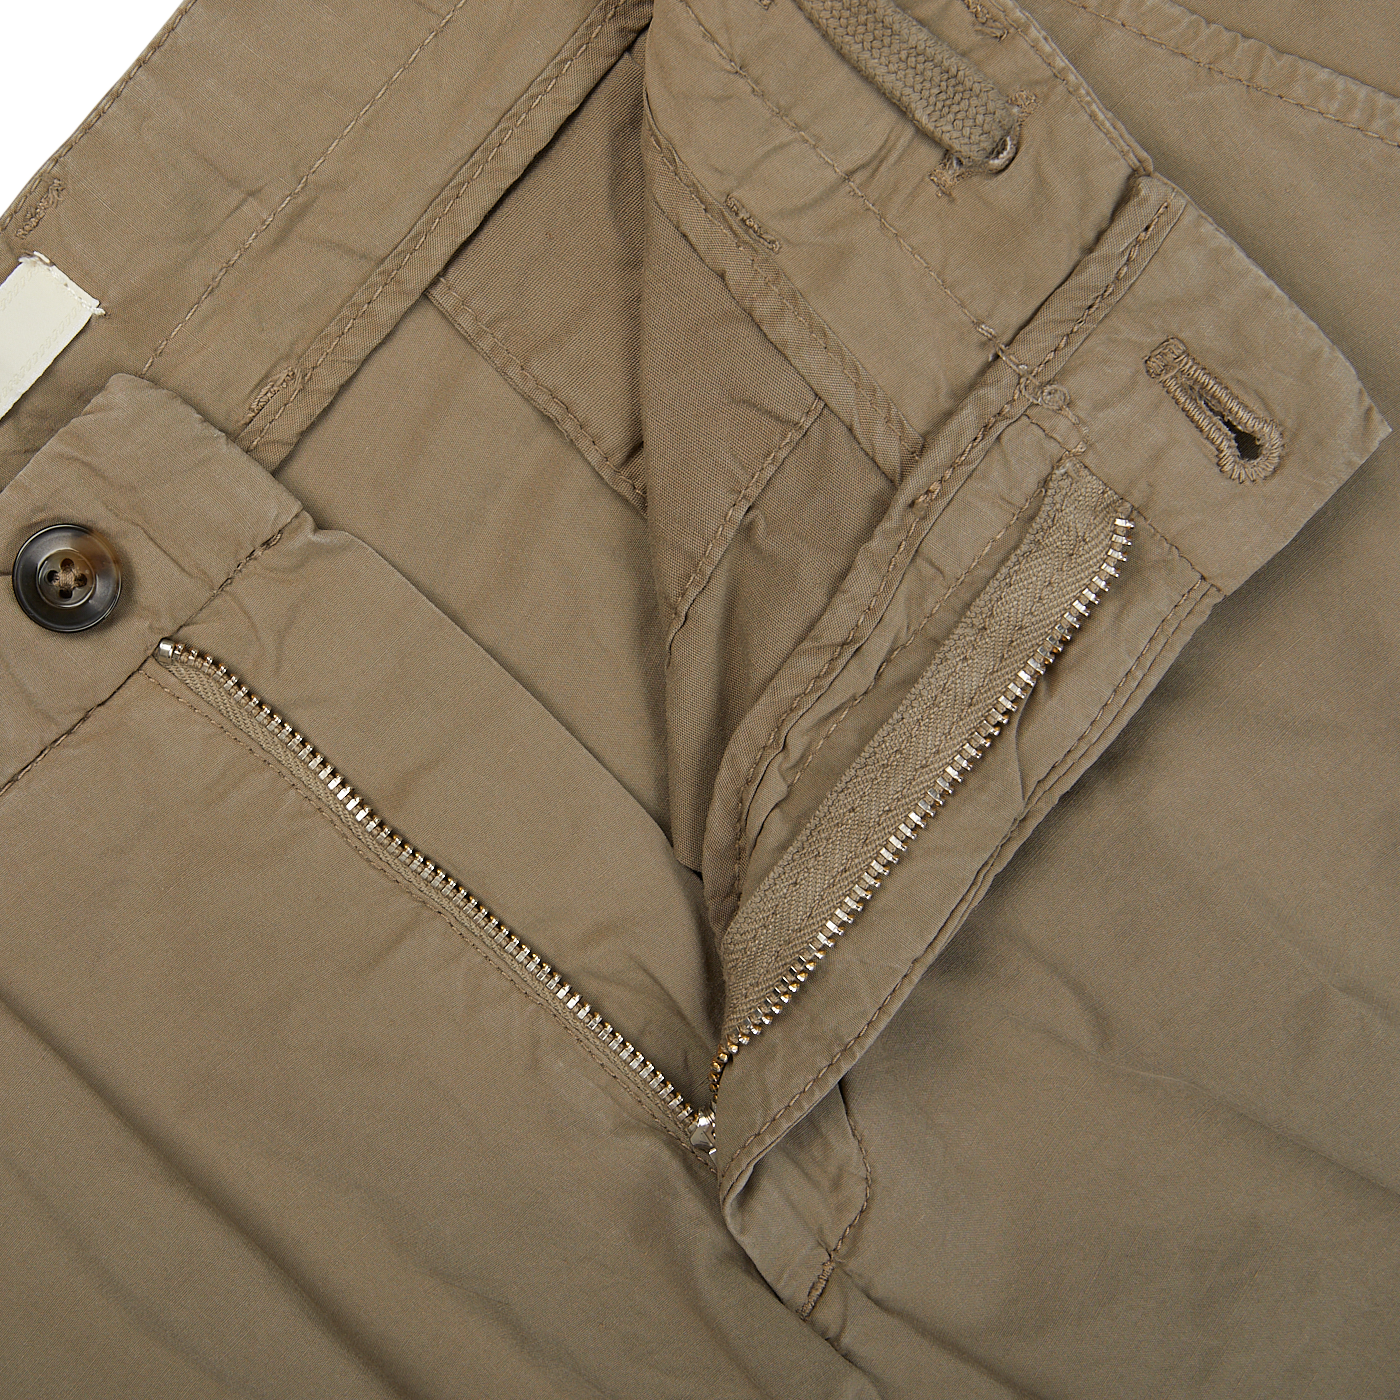 A pair of Briglia Olive Green Cotton Drawstring Malibu Shorts with zippers on the side.